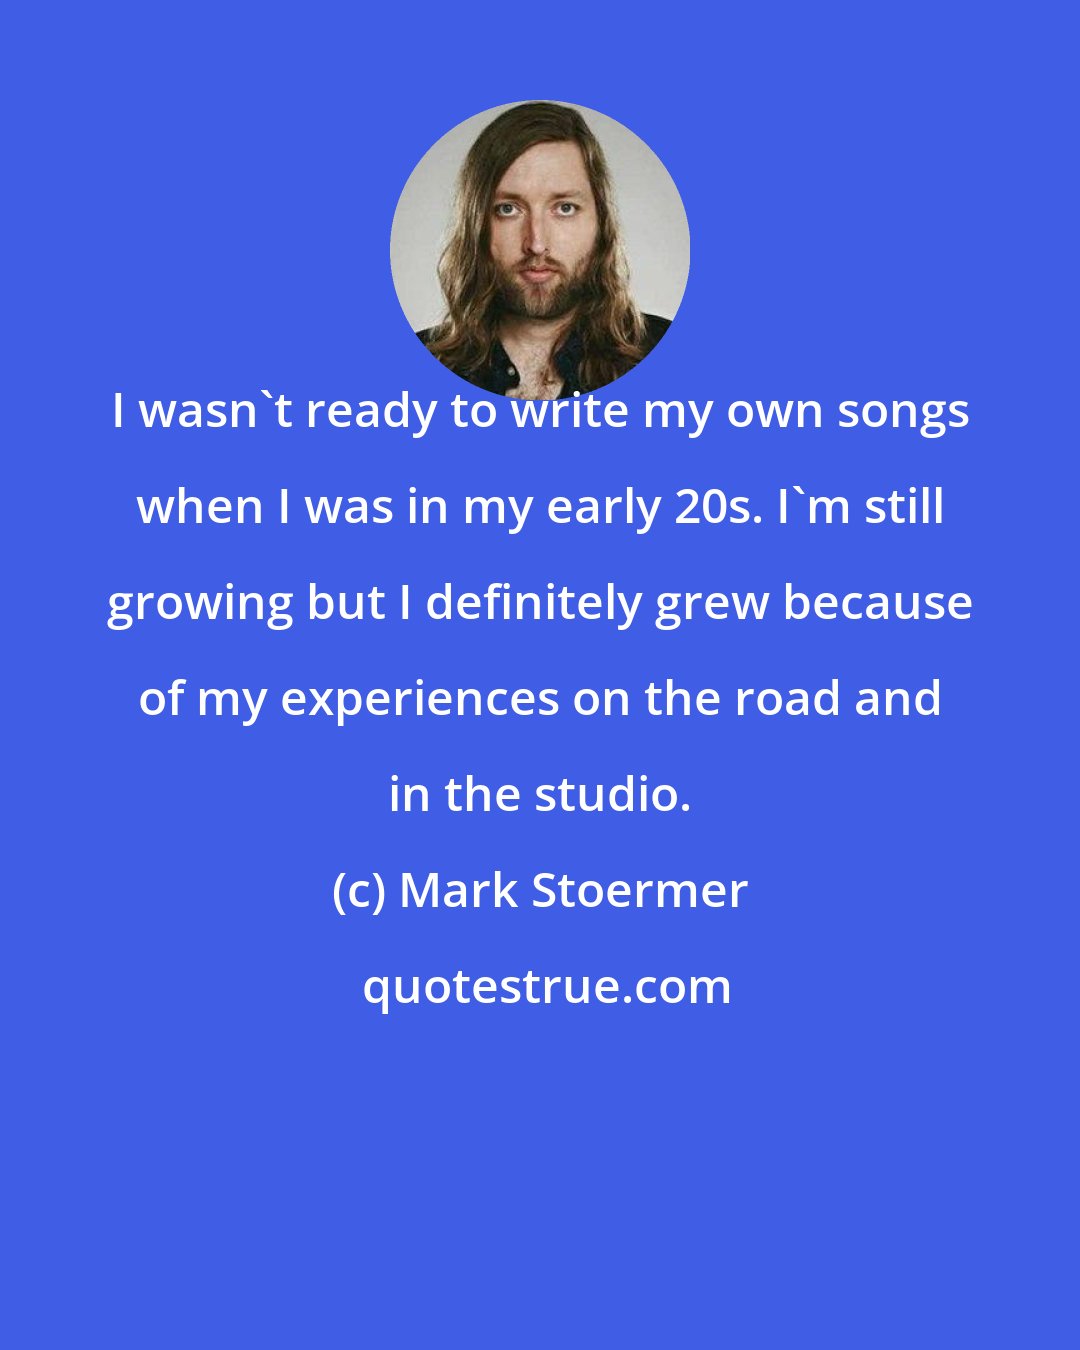 Mark Stoermer: I wasn't ready to write my own songs when I was in my early 20s. I'm still growing but I definitely grew because of my experiences on the road and in the studio.